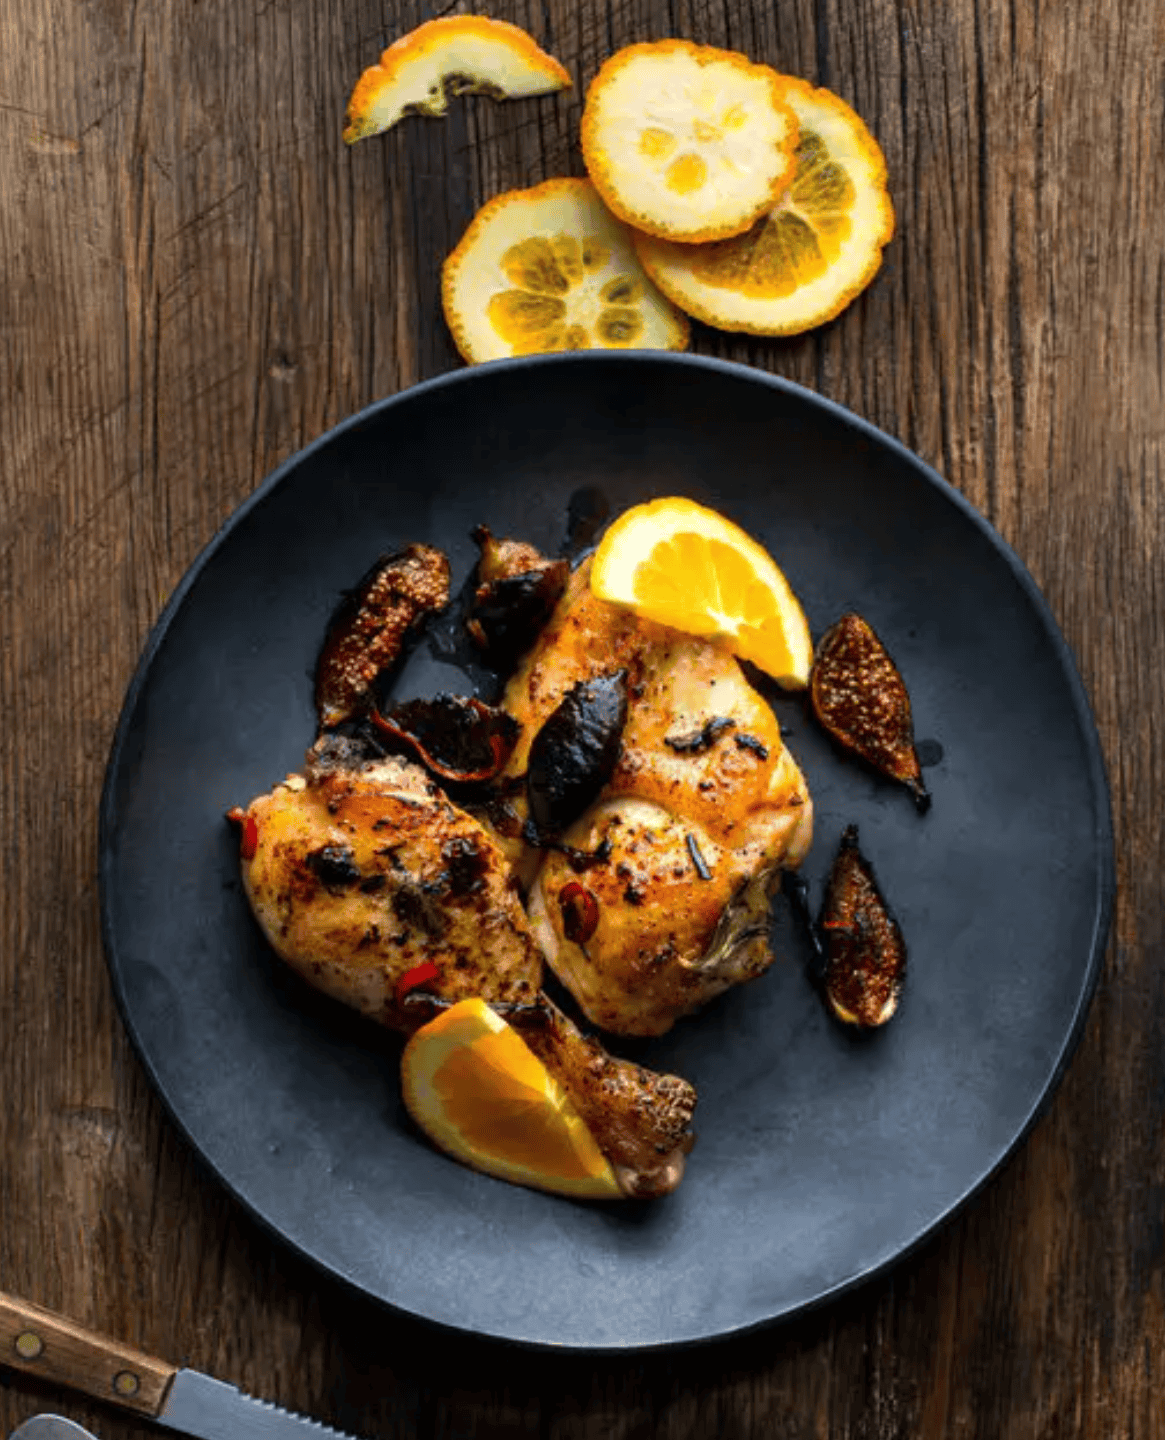 Roasted Chicken with Figs